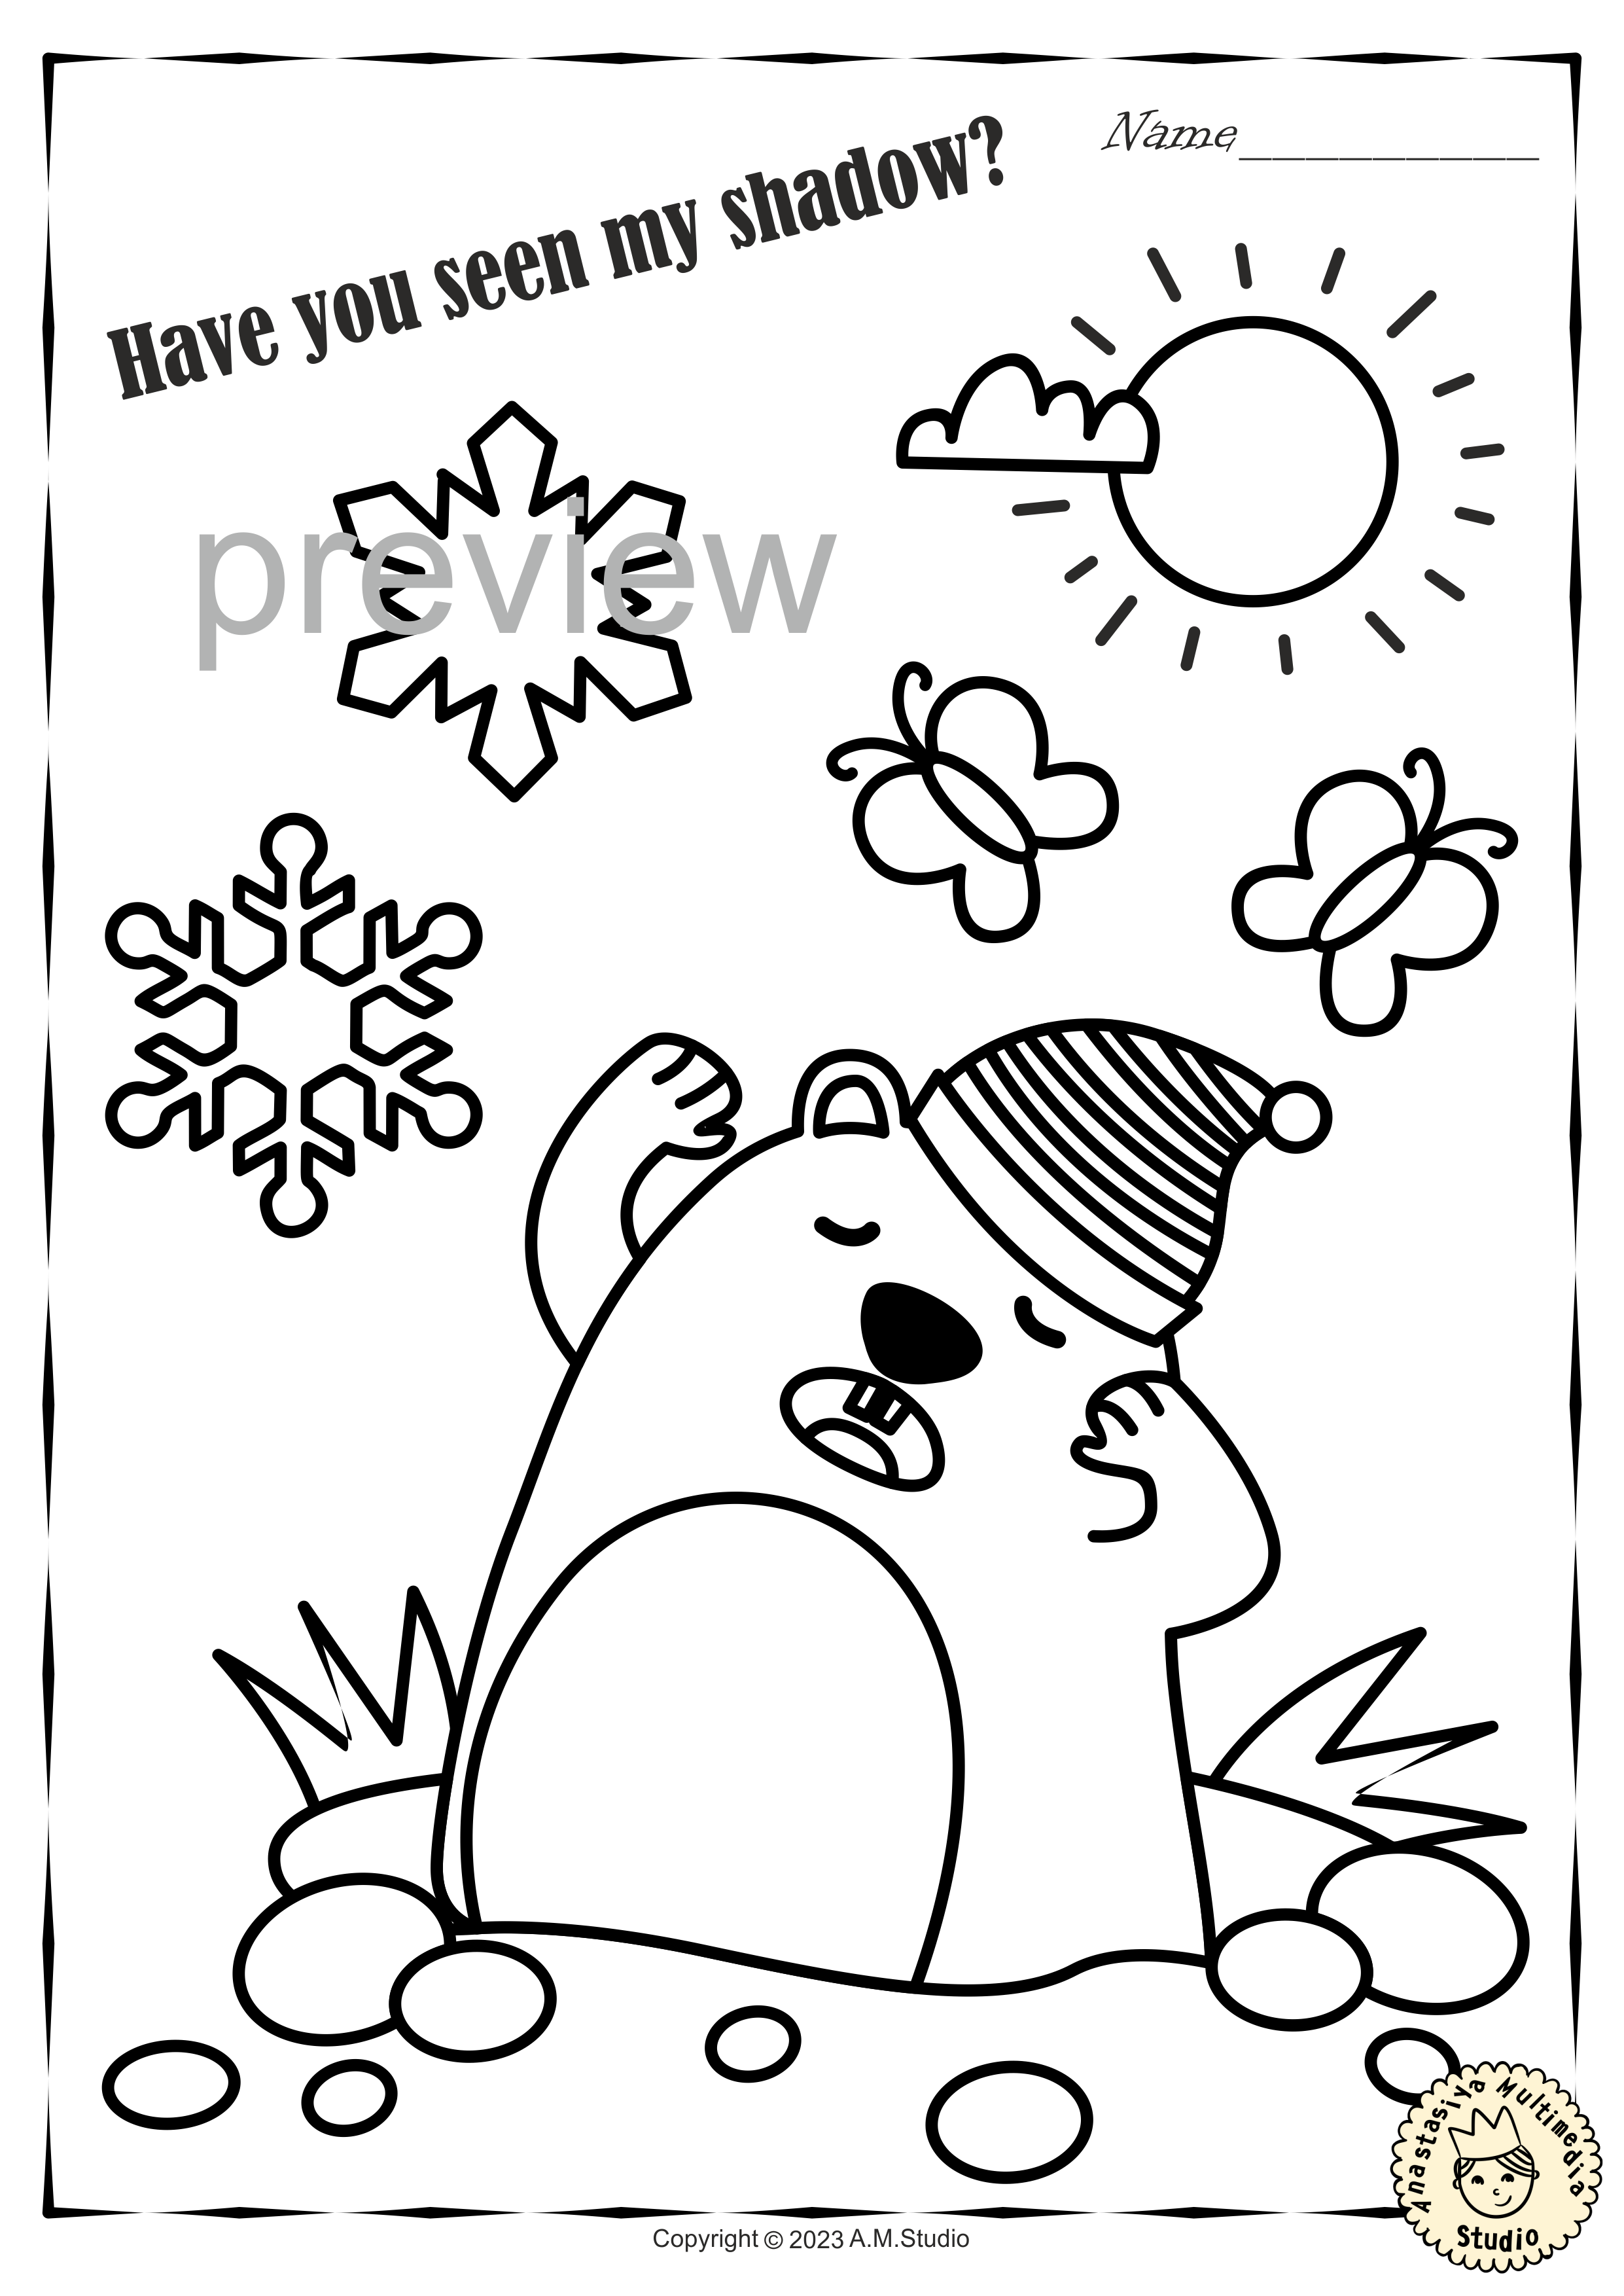 Groundhog day printable coloring pages for children